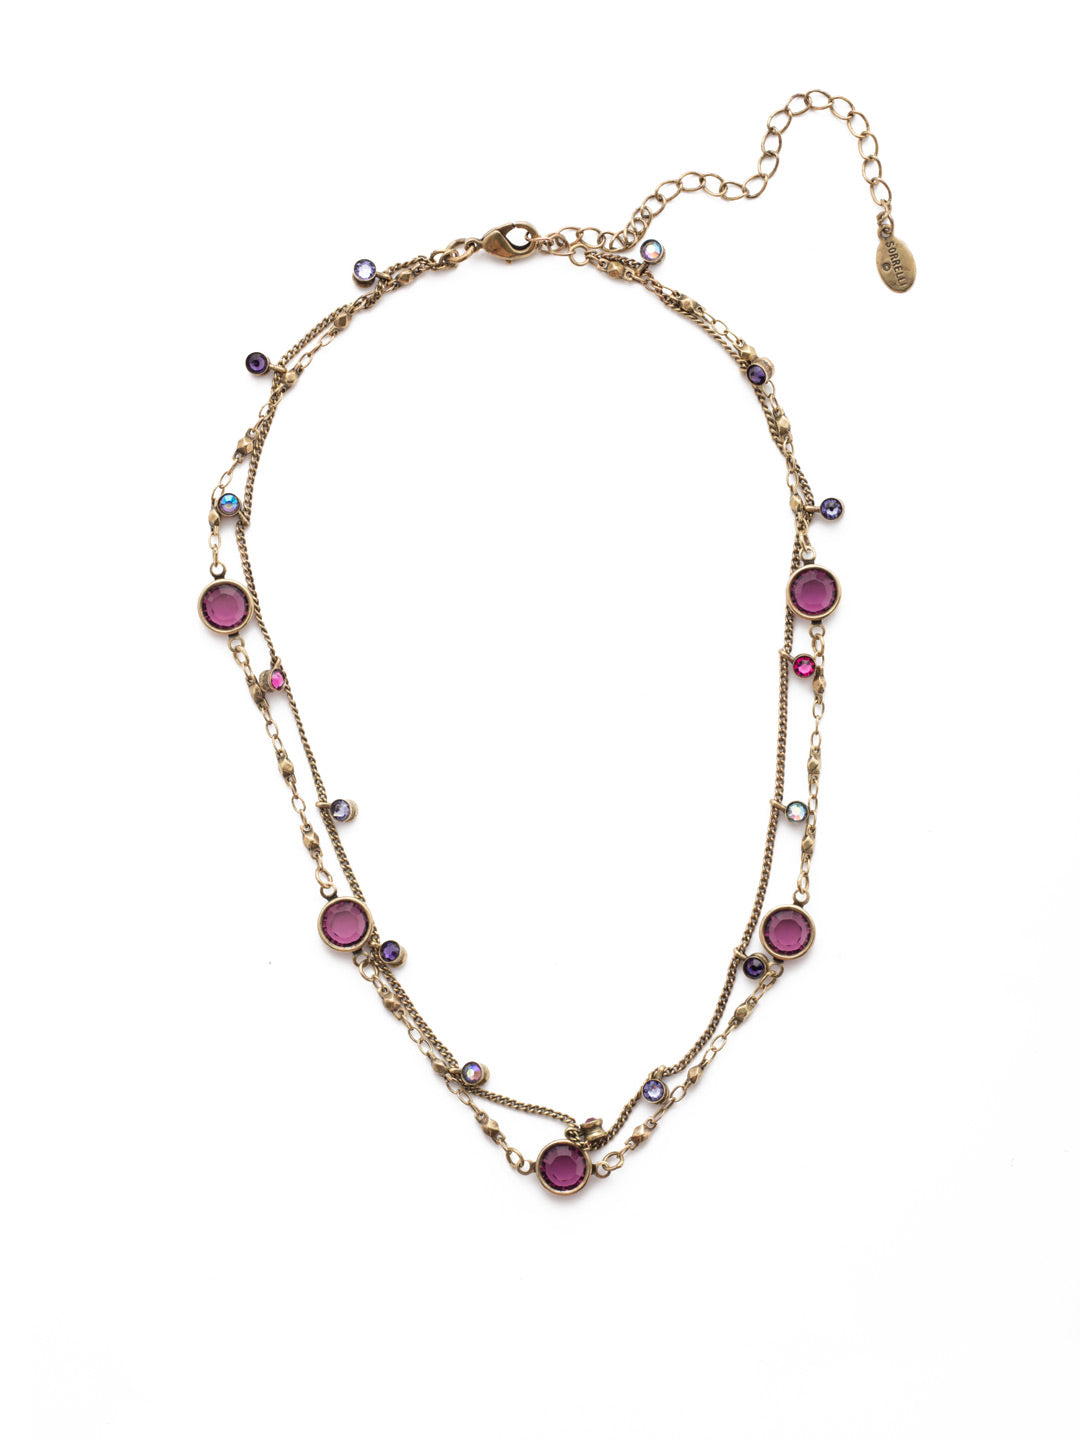 Dewdrop Layered Necklace - NEK36AGDCS - Delicate layers of chain drizzled with droplets of opaque crystals. A quick and easy solution for a layered look with one piece. From Sorrelli's Duchess collection in our Antique Gold-tone finish.